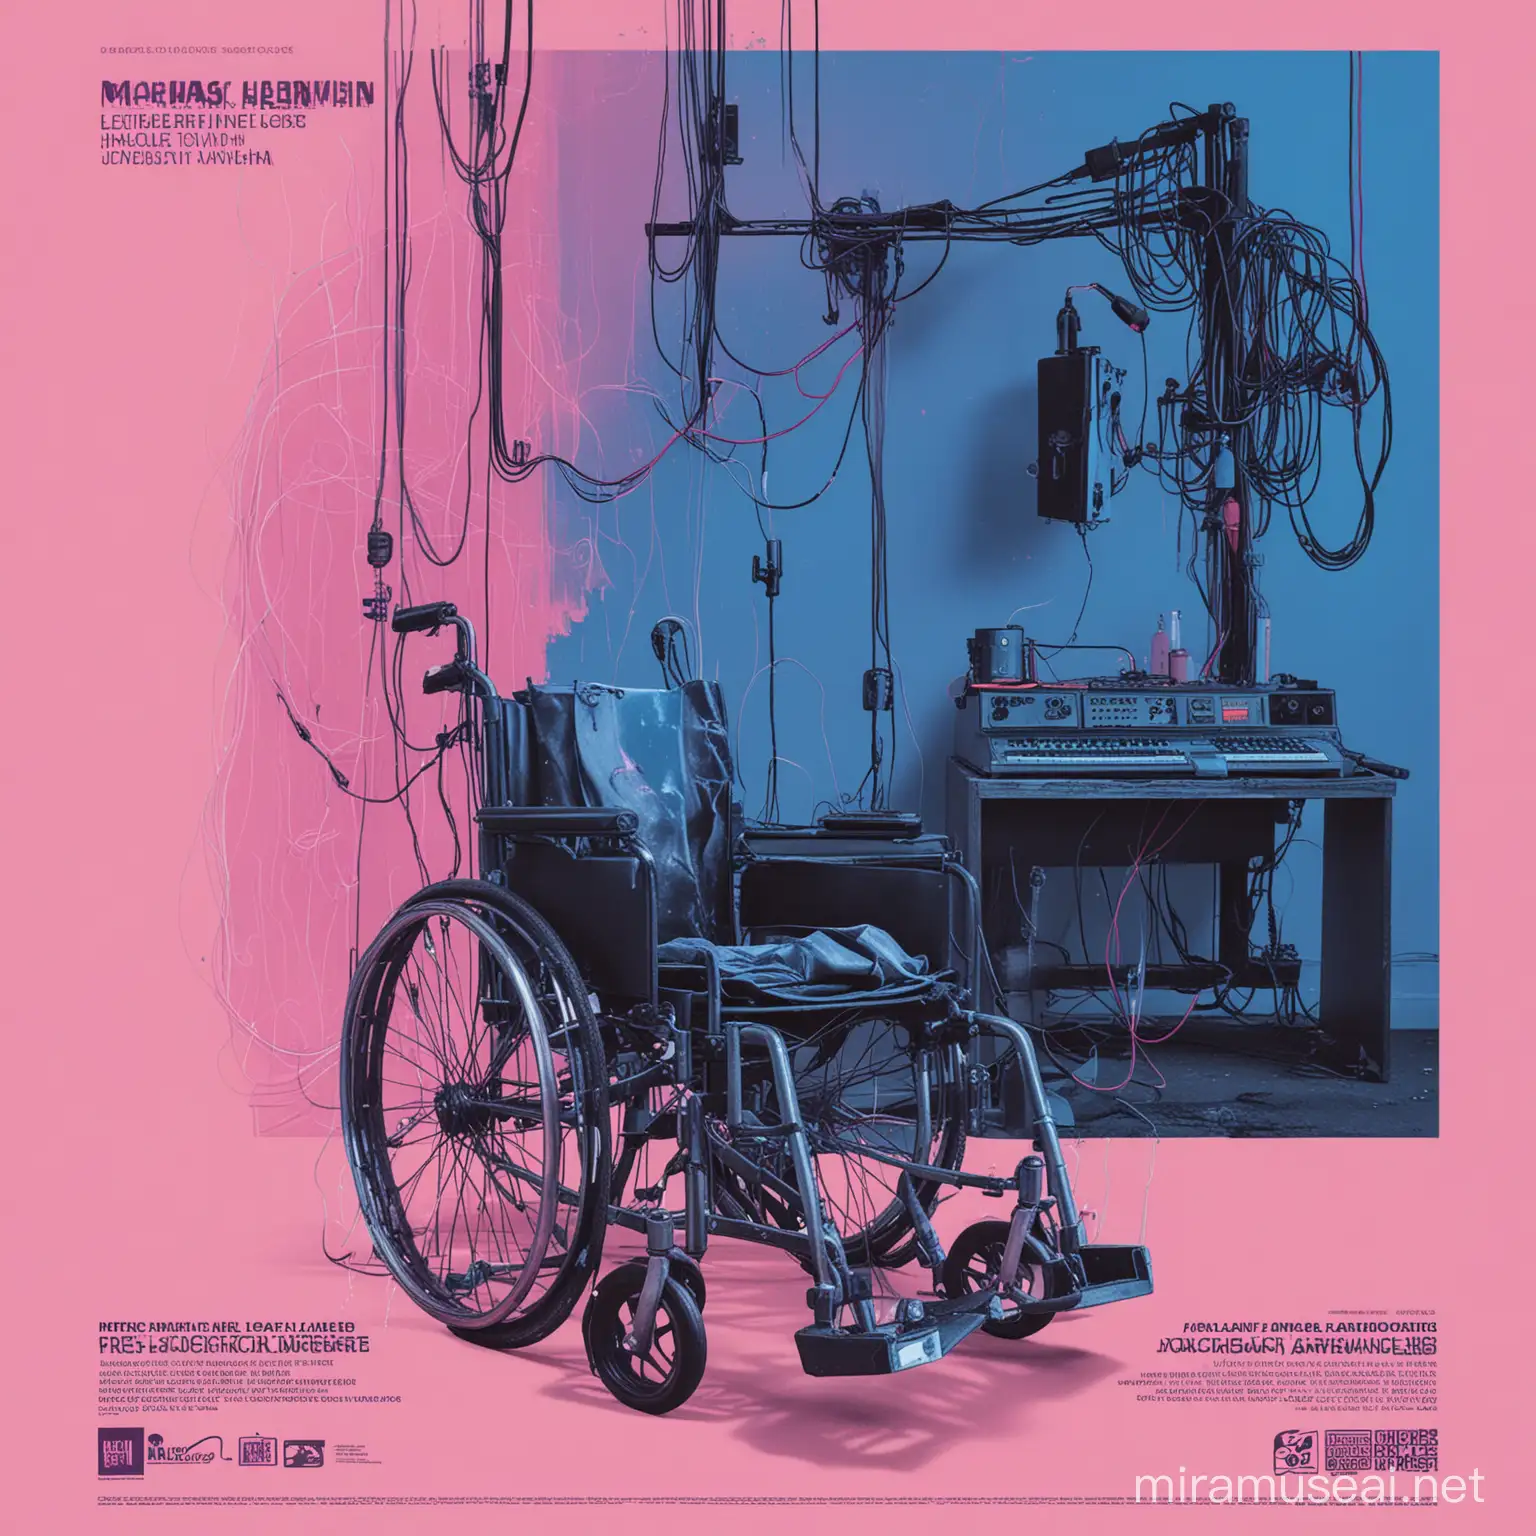 a scruffy sketchy collage style flyer for an electronic music night called 'Machine Learning' - to include an interior view of an abandoned old peoples home with wires hanging from the ceiling, an abandoned wheelchair with a puddle of urine beneath it - all bathed in  blue and pink neon lighting.